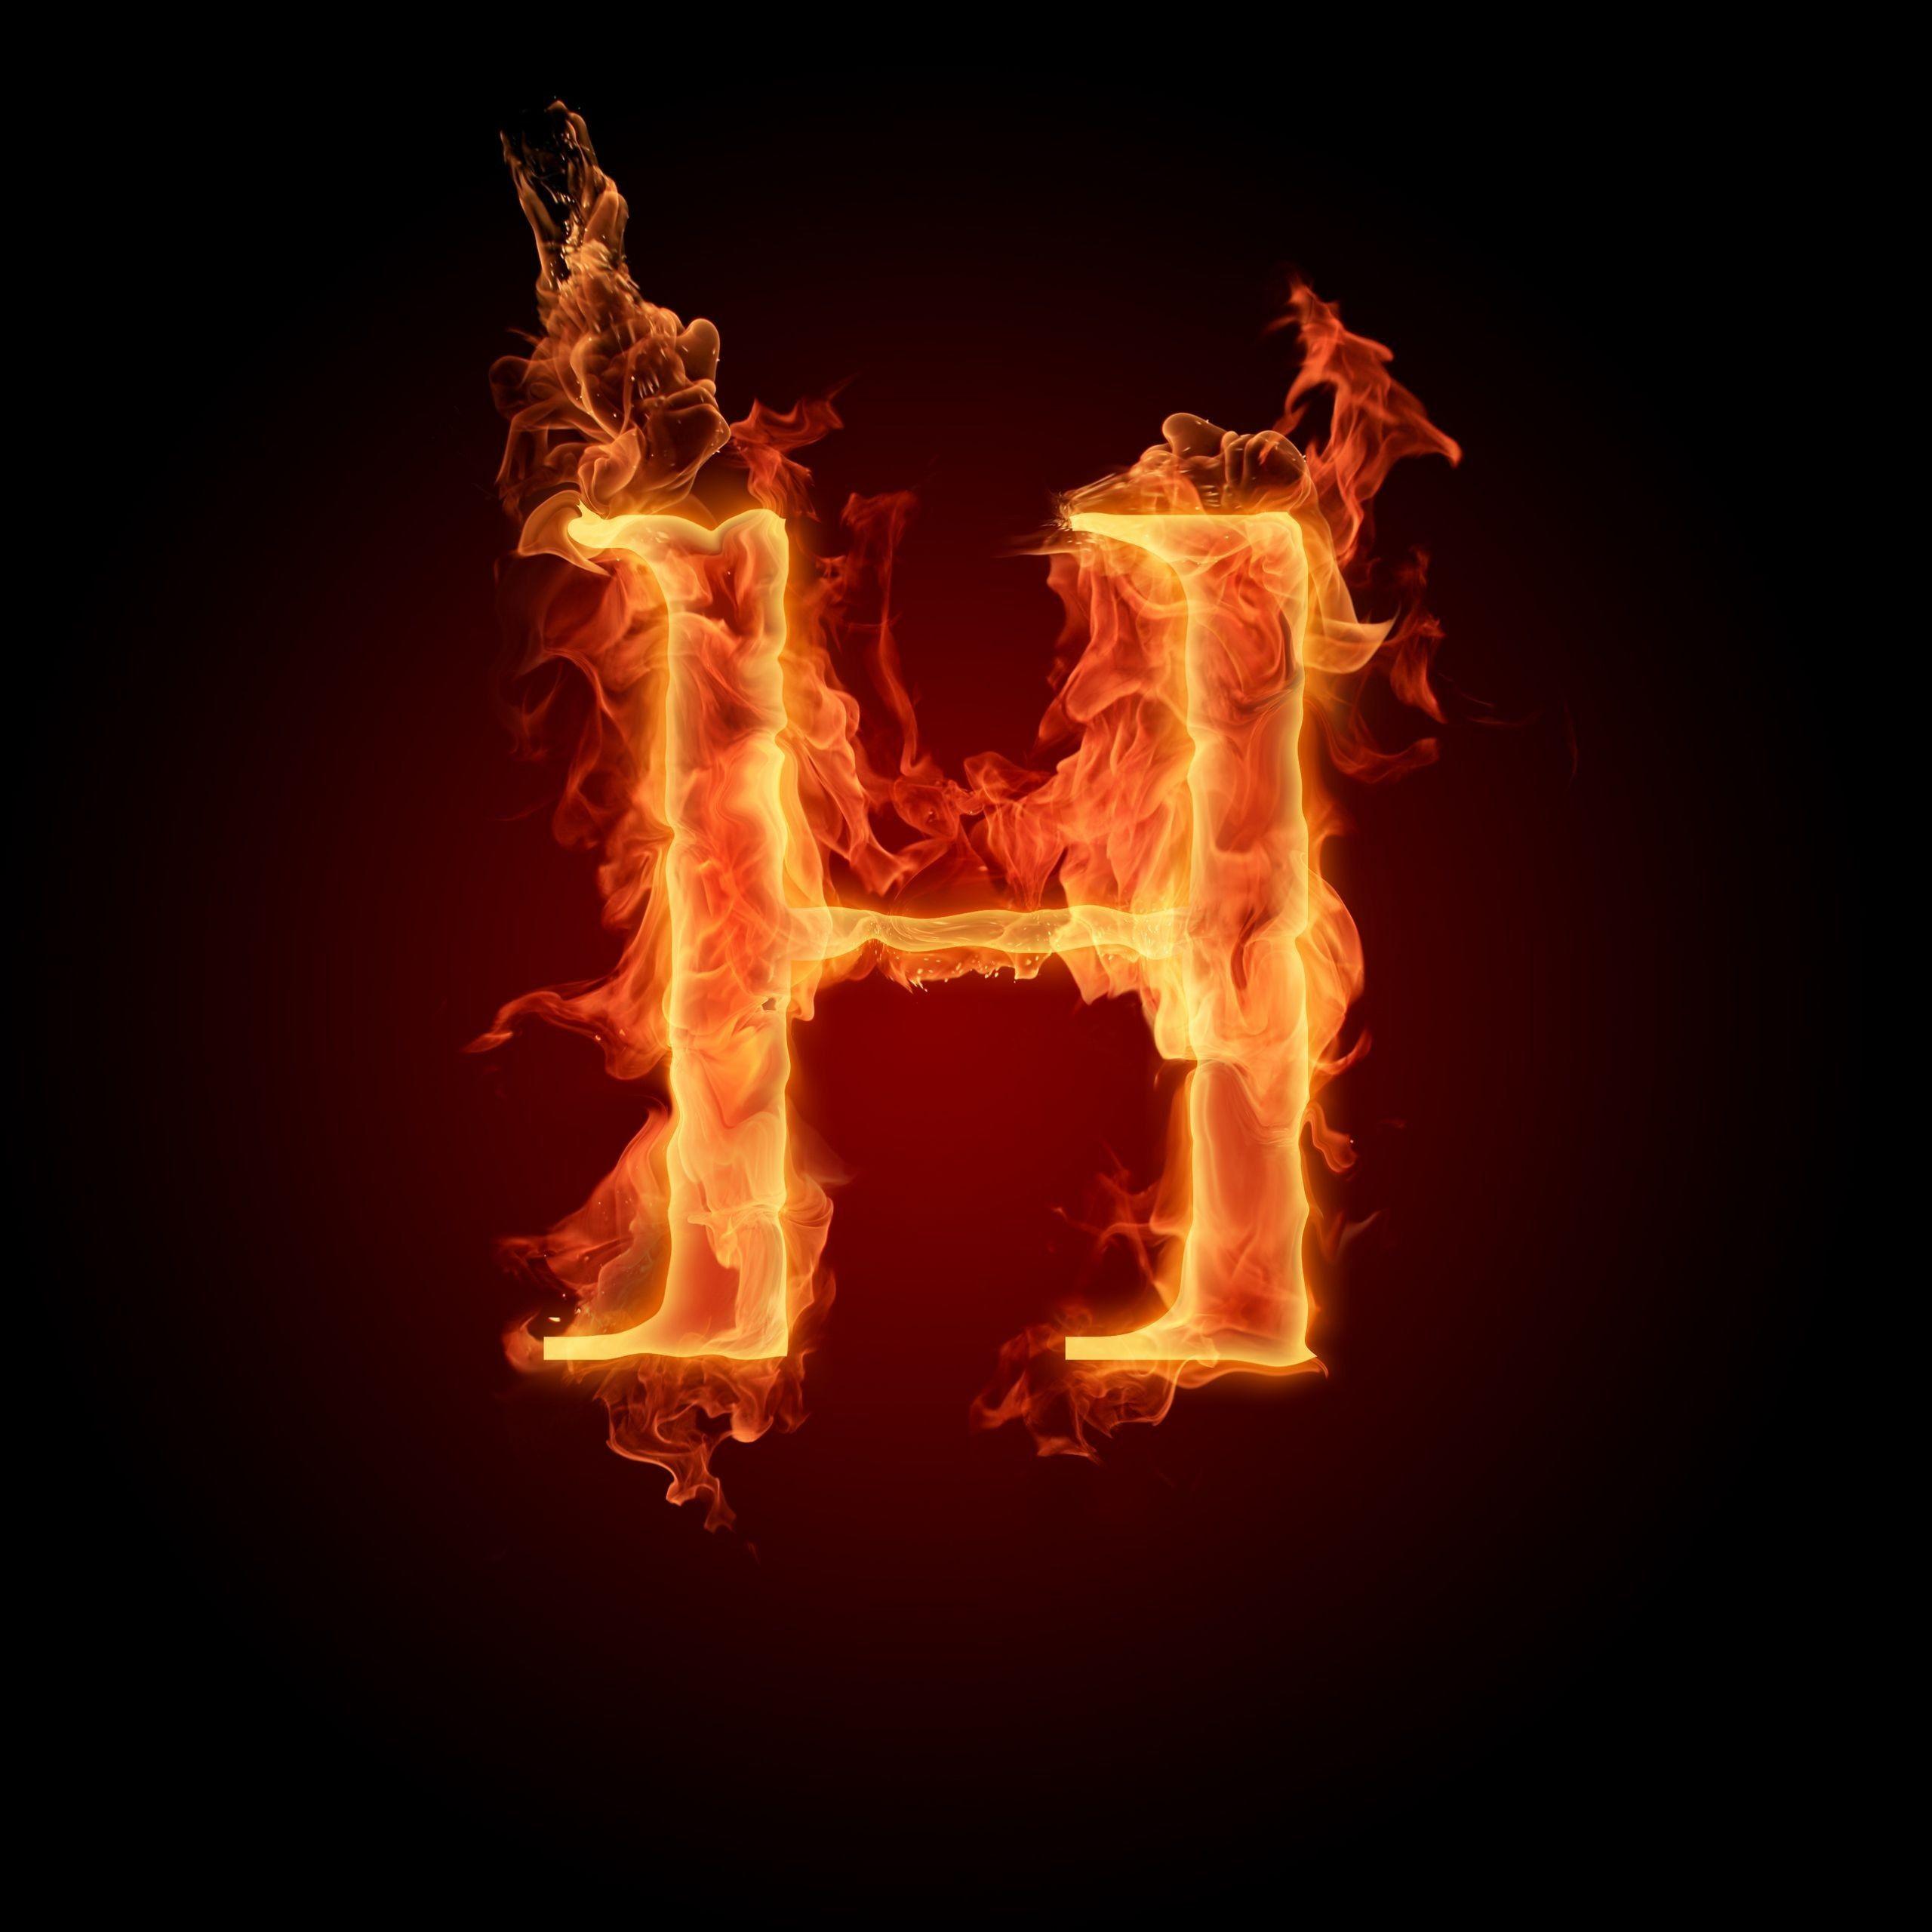 H Large Letter HD Image Com New Stylish A Letter Wallpaper